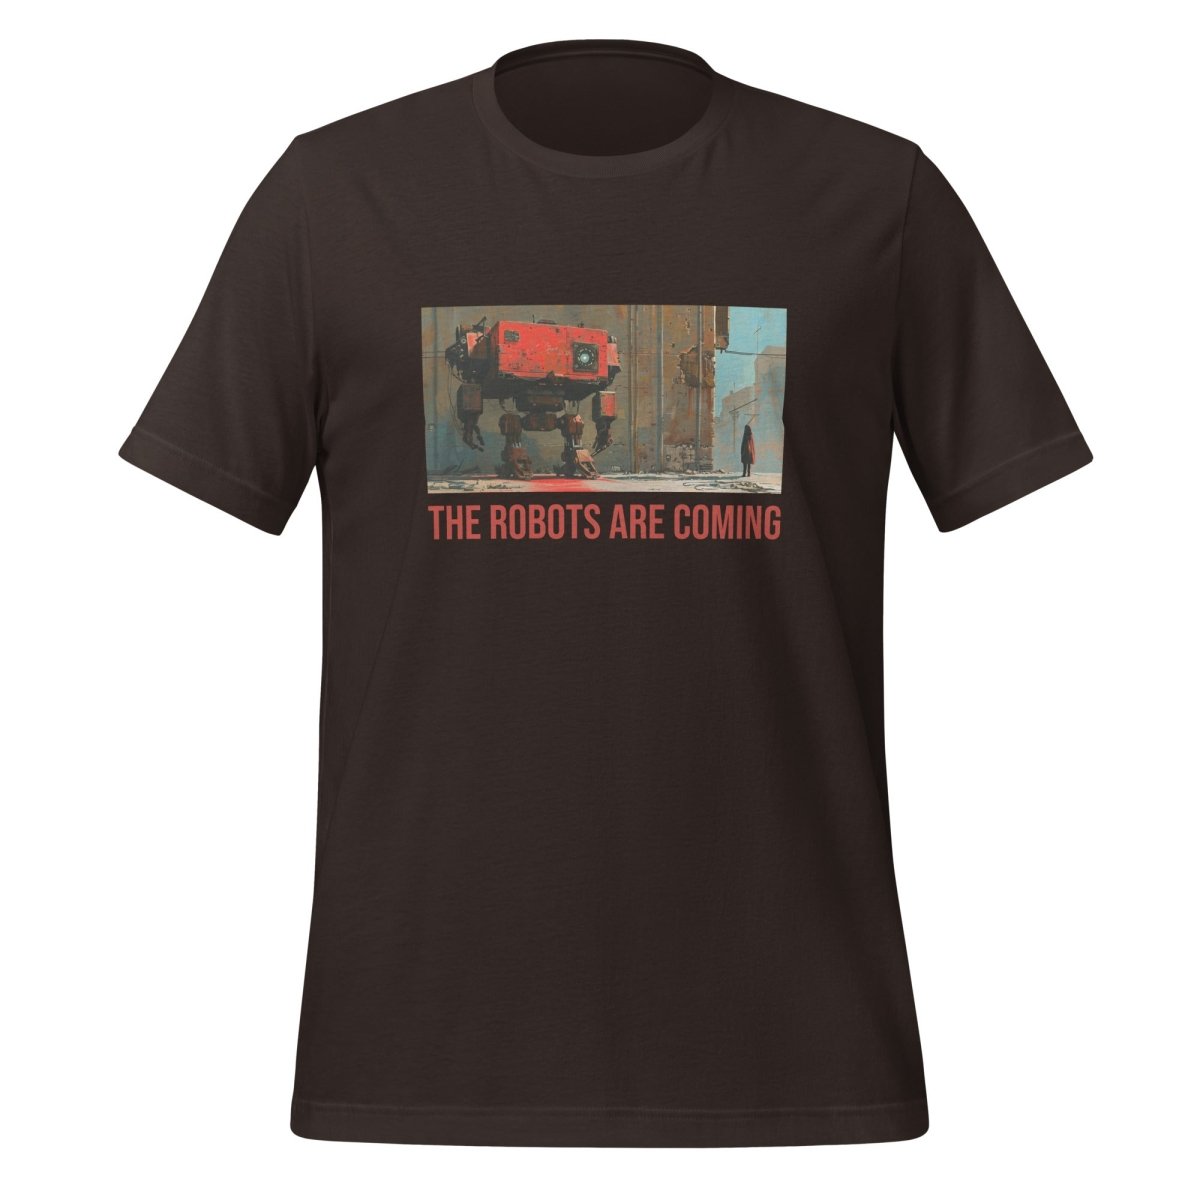 Illustrated The Robots Are Coming T - Shirt (unisex) - Brown - AI Store